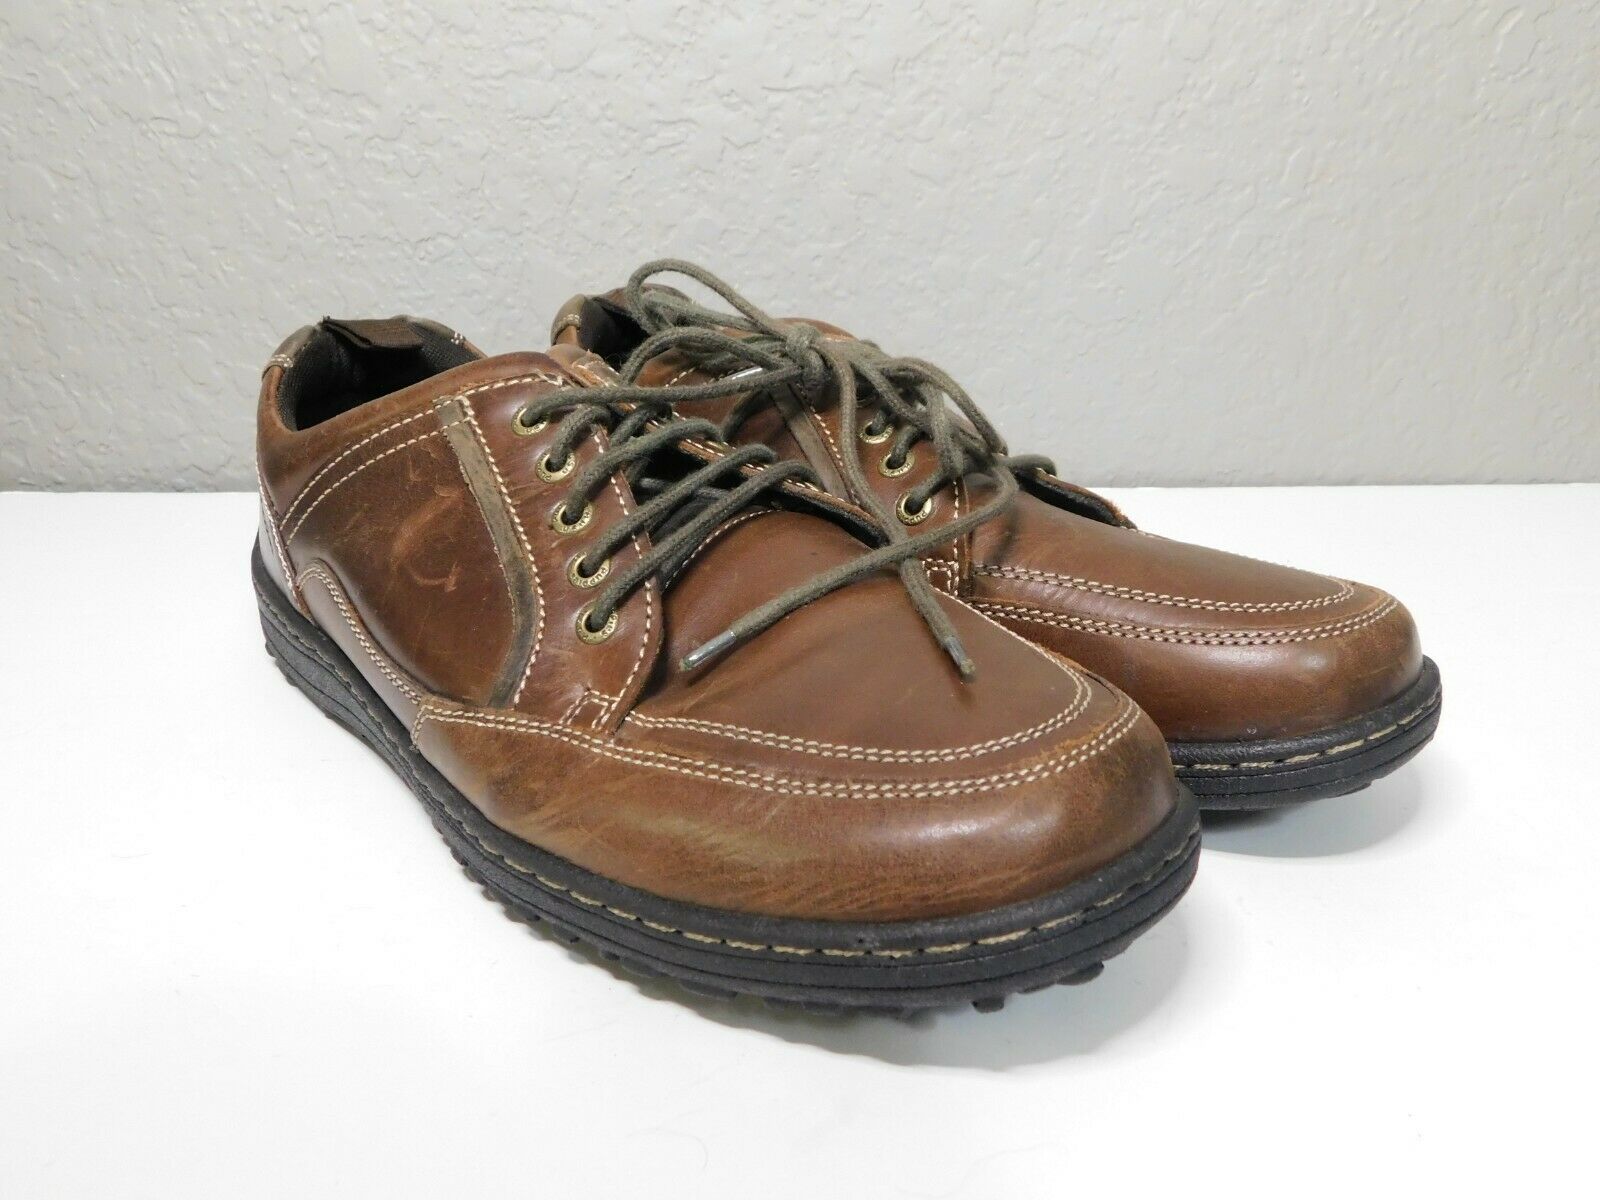 Hush Puppies Extra Wide Belfast Oxford_MT Brown Men's Shoes US Size 12 H103361